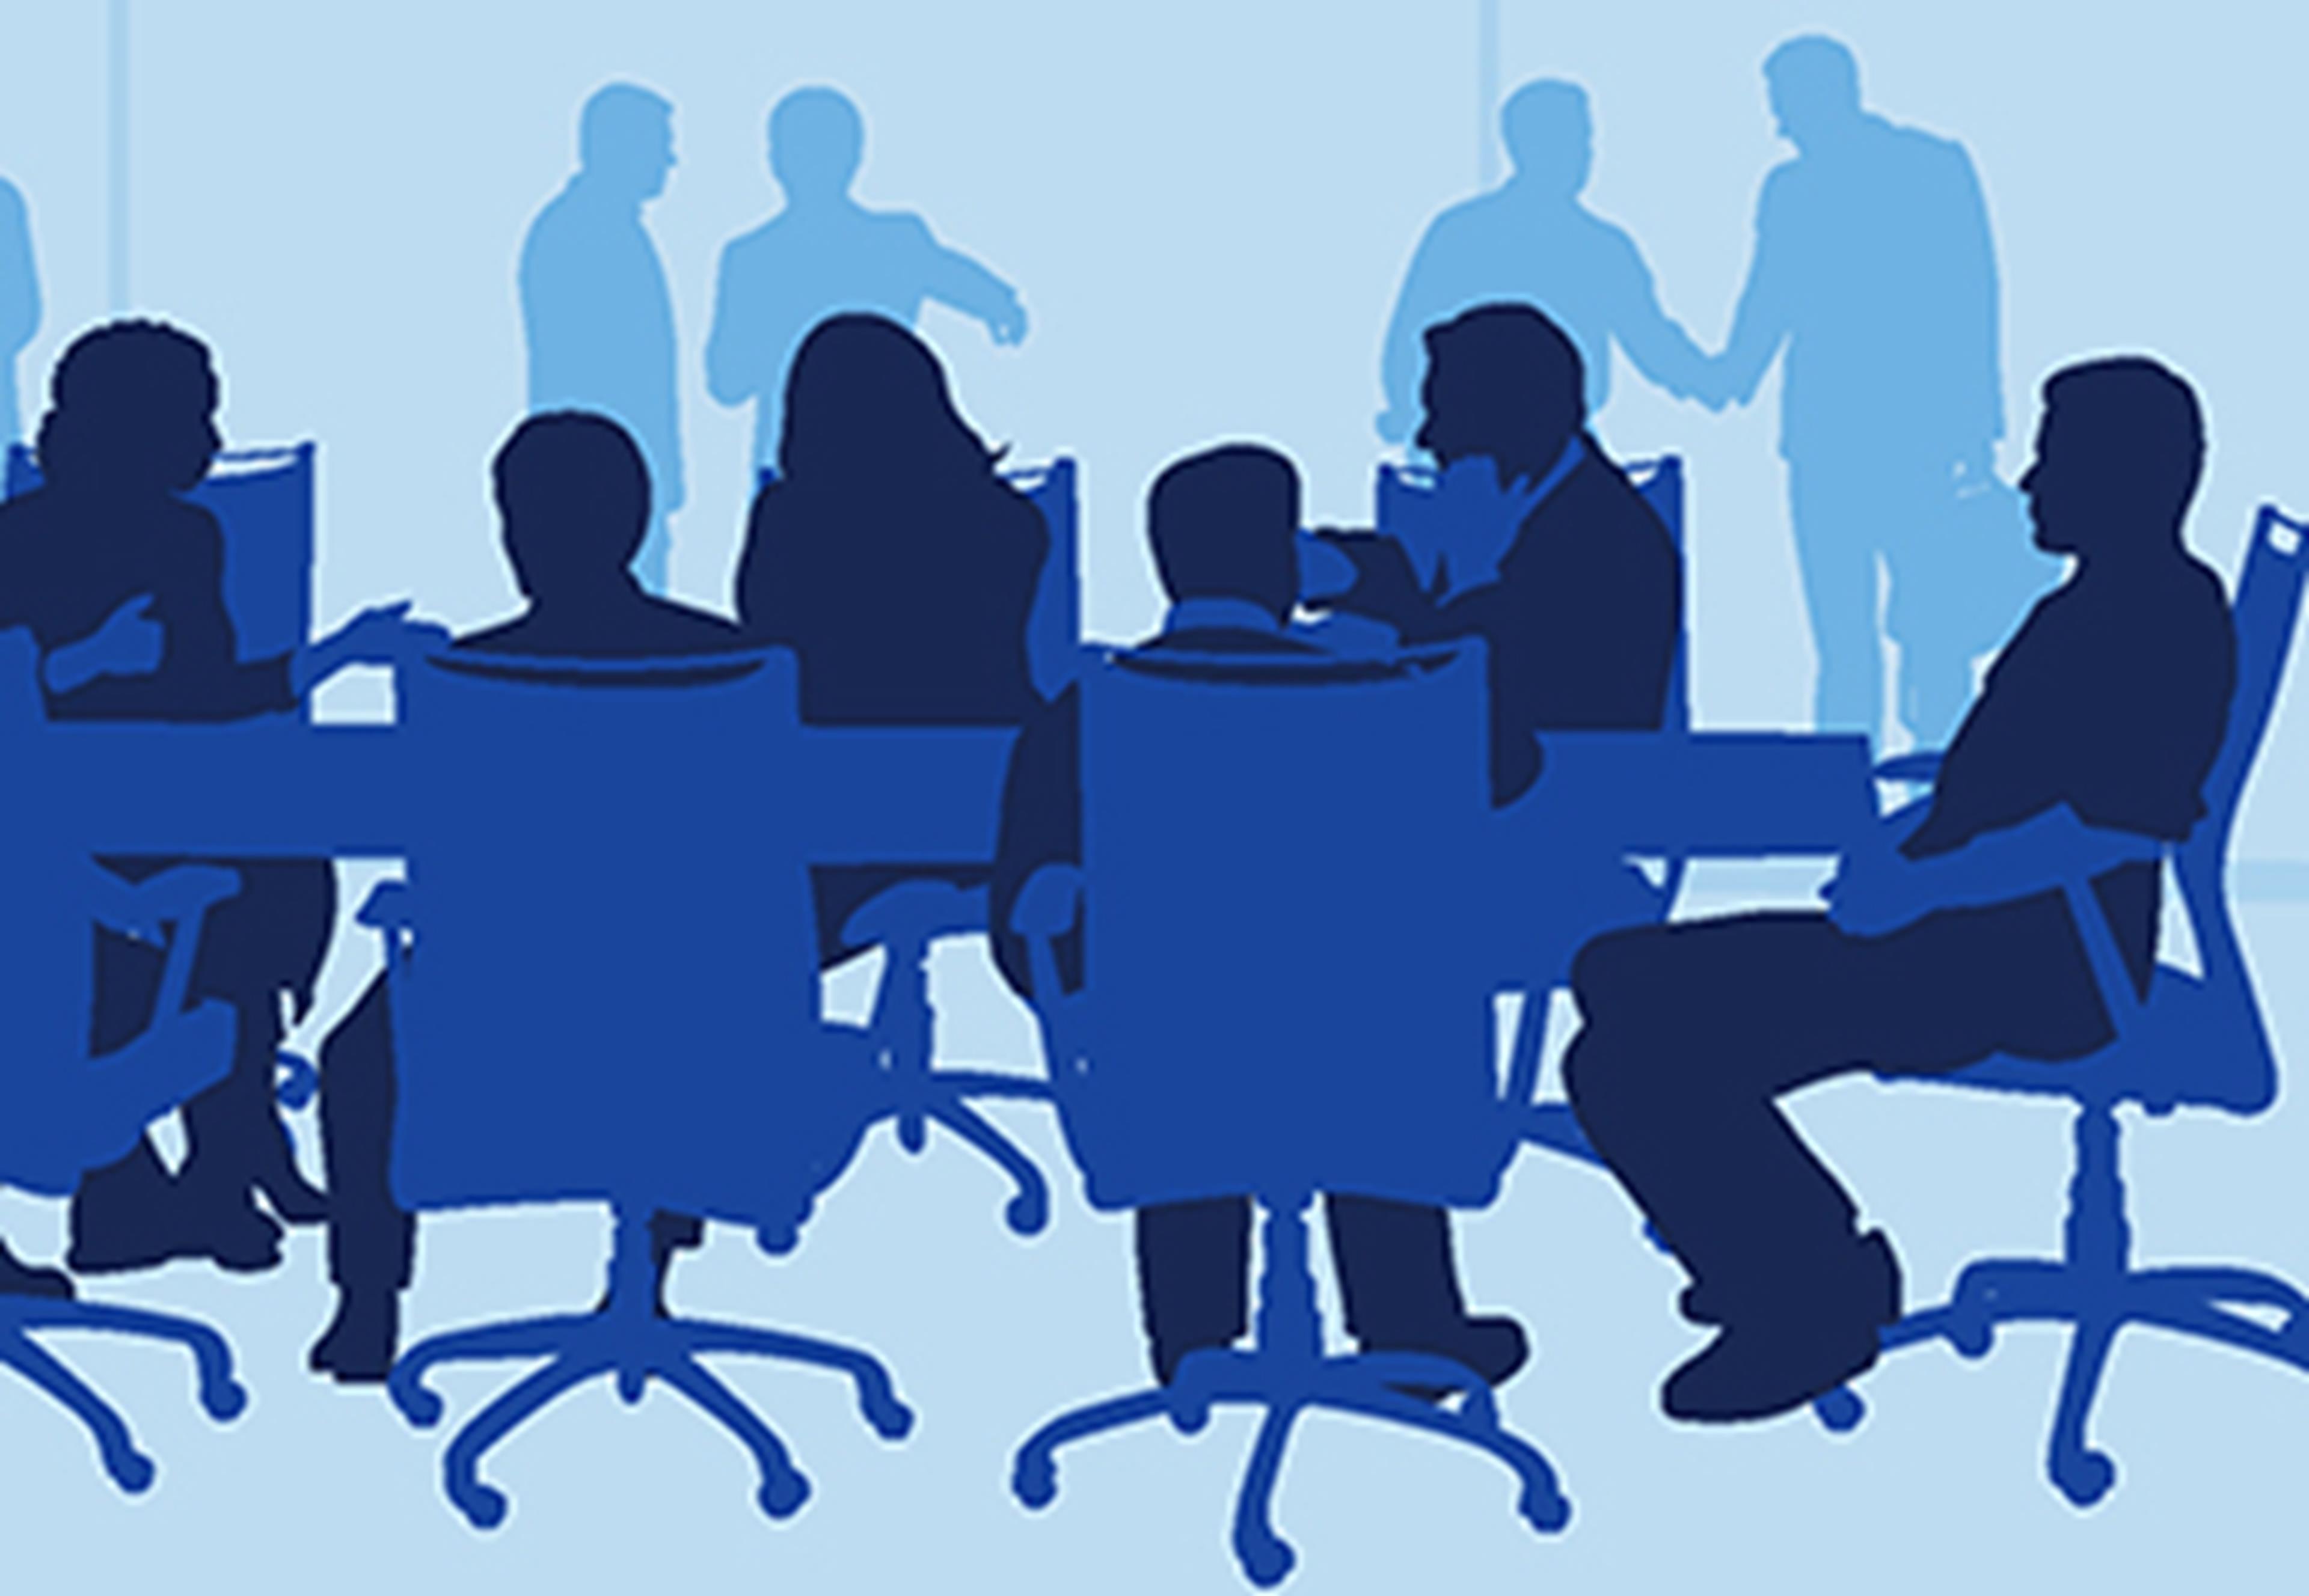 Illustration of silhouettes sitting in a meeting in blue